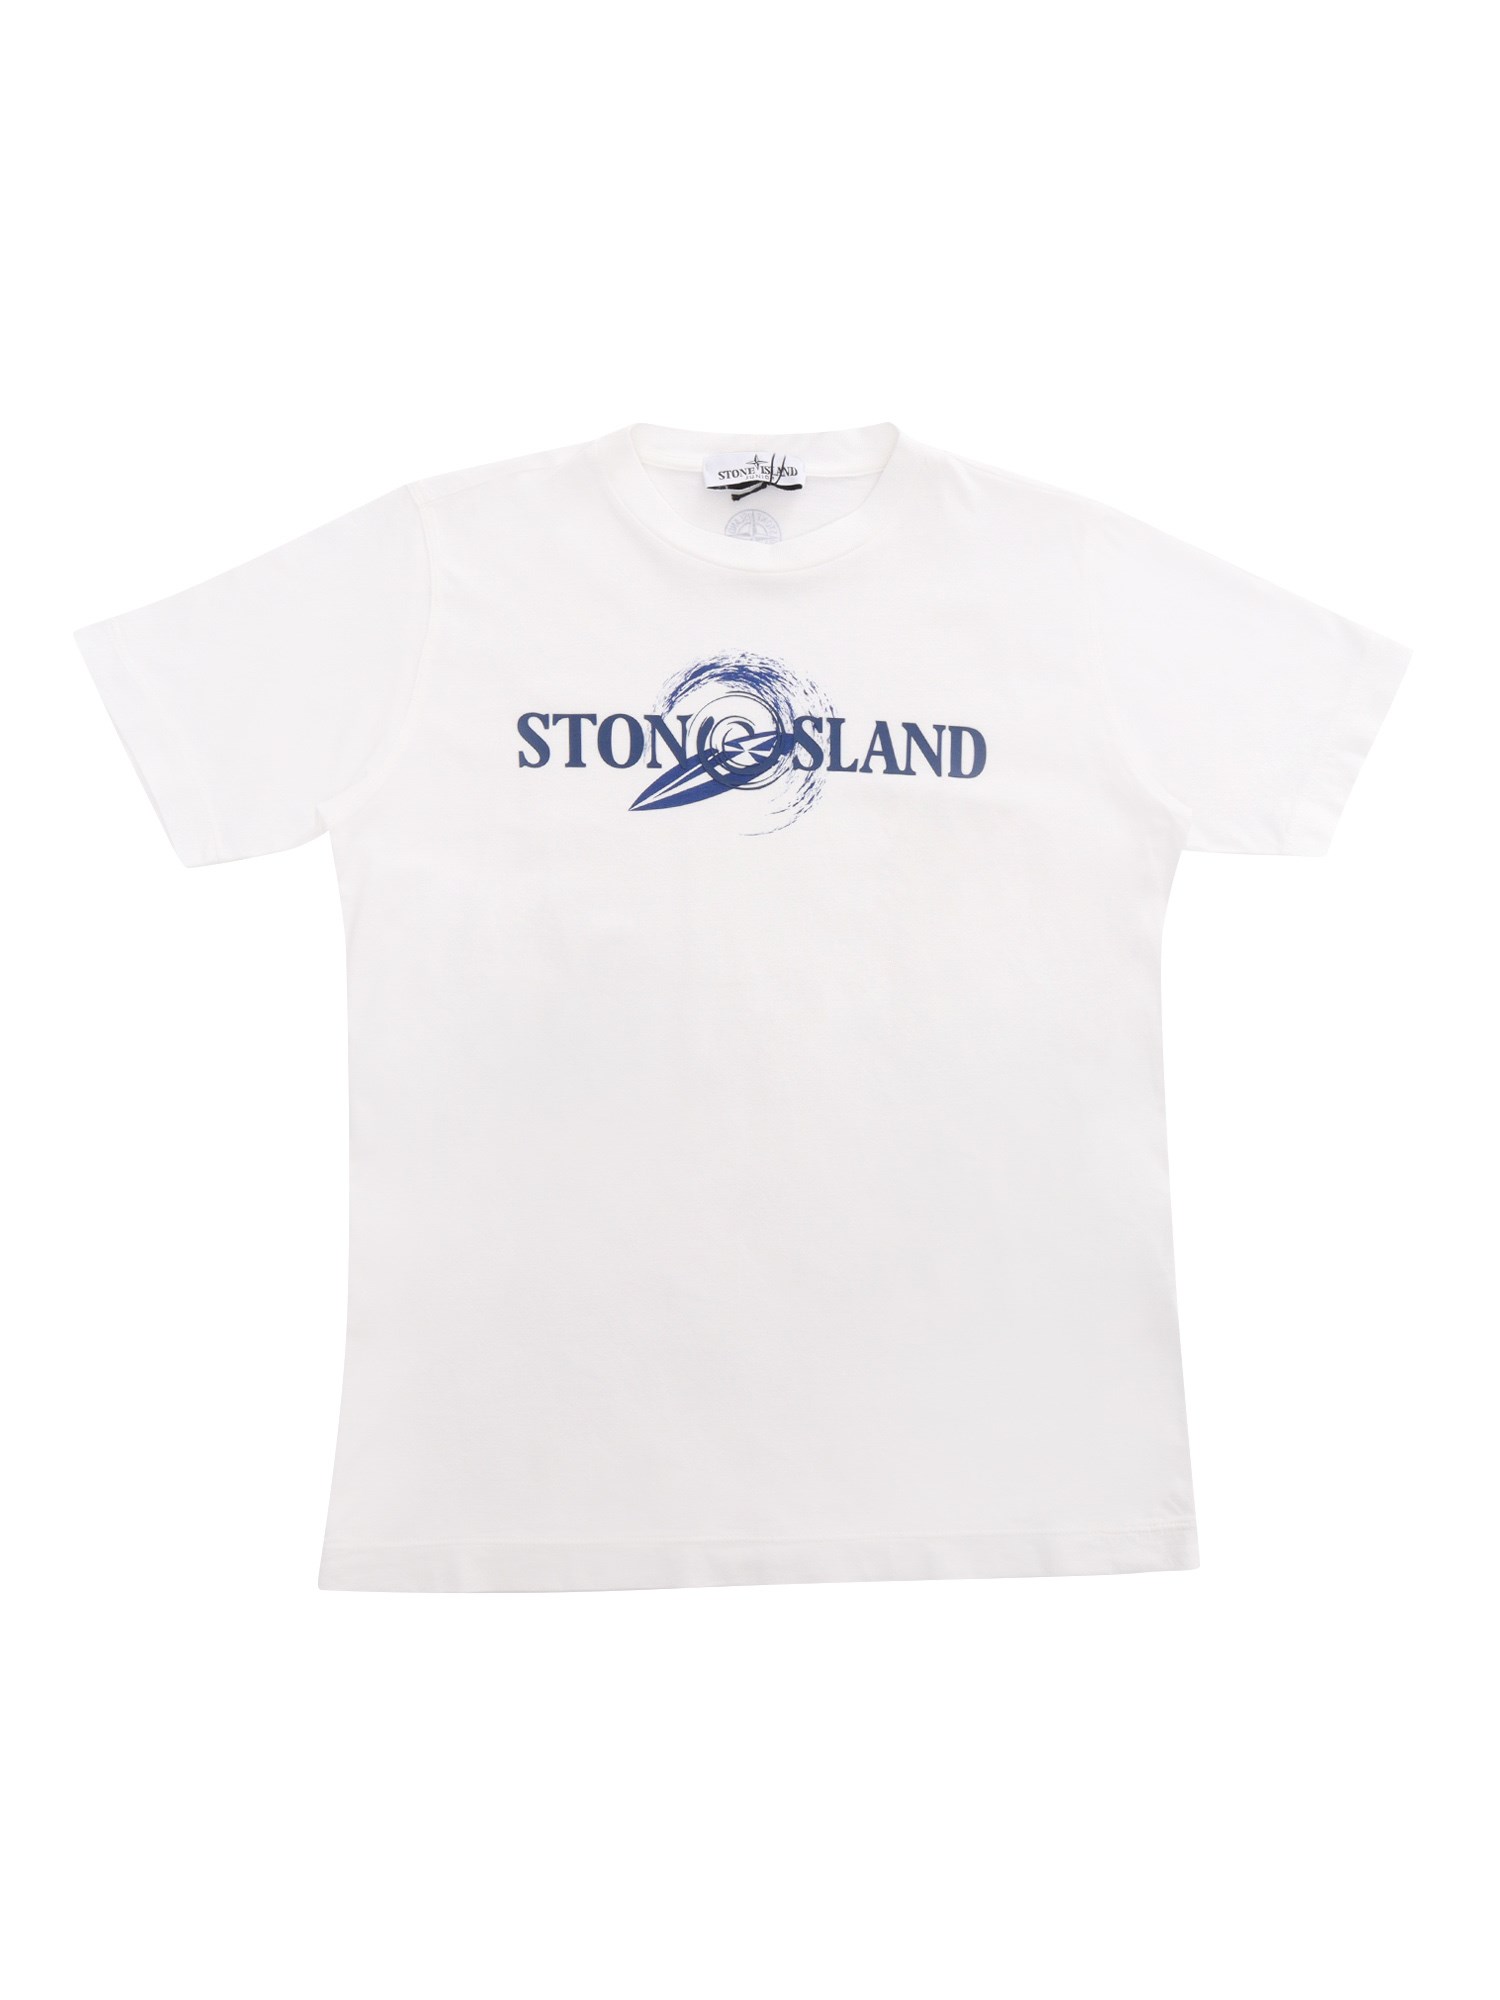 Stone Island White T-shirt With Blue Prints